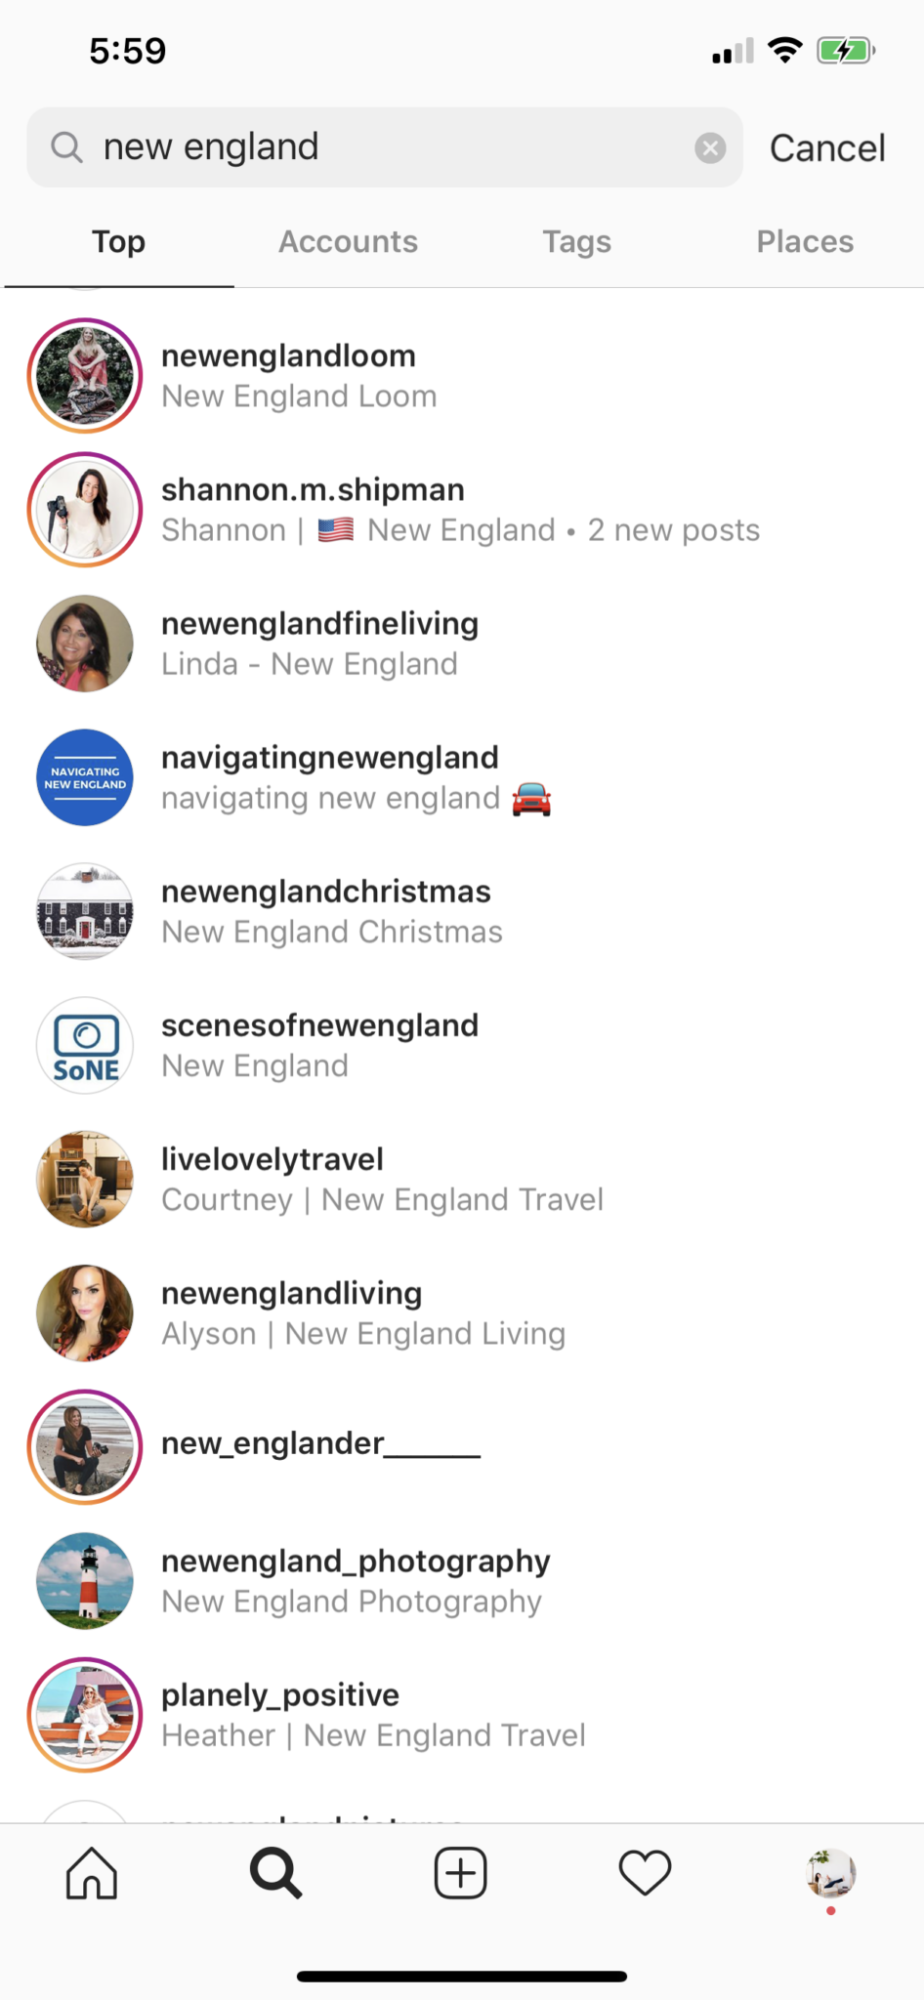 First Impressions: Your Instagram Bio | Instagram Bio Tips by popular New England influencer, Shannon Shipman:  screen shot image of the Instagram search bar.